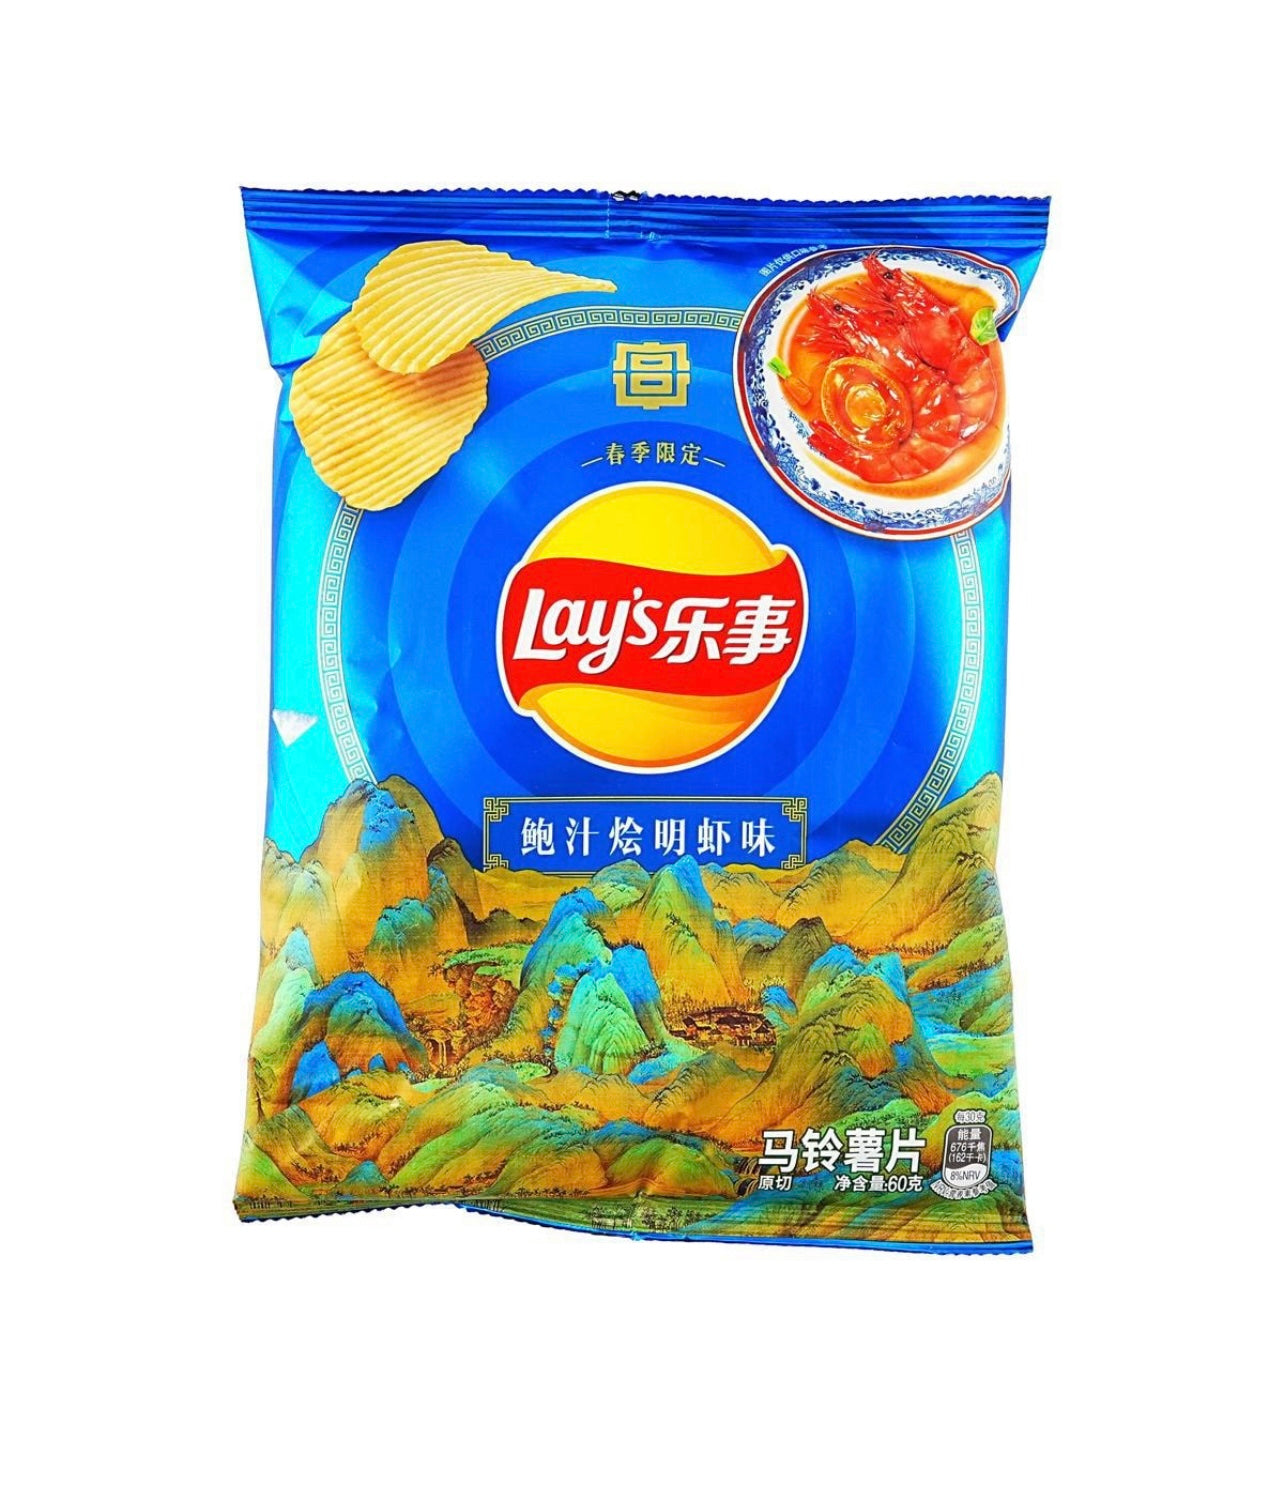 Lay's Potato Chips ,Shrimp with Abalone Sauce Flavor, 2.11 oz